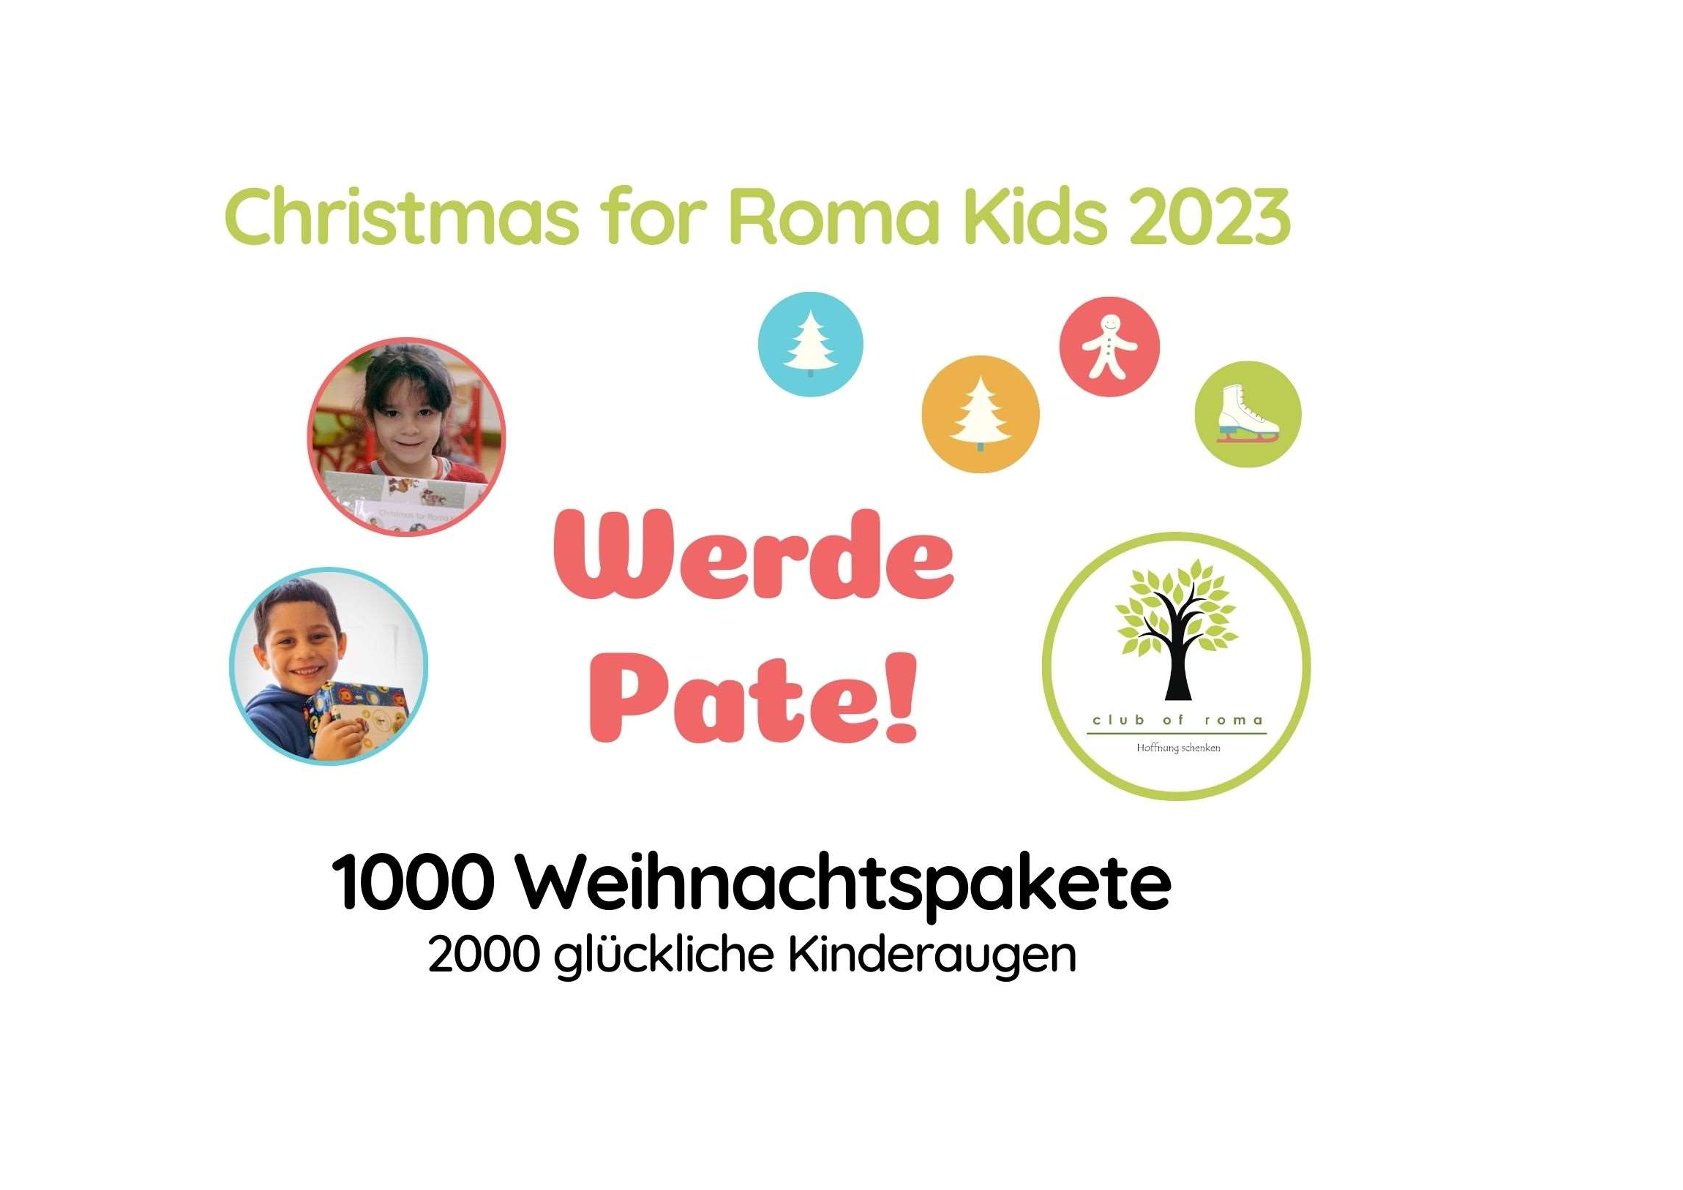 2023 Christmas for Roma Kids - Werde Pate